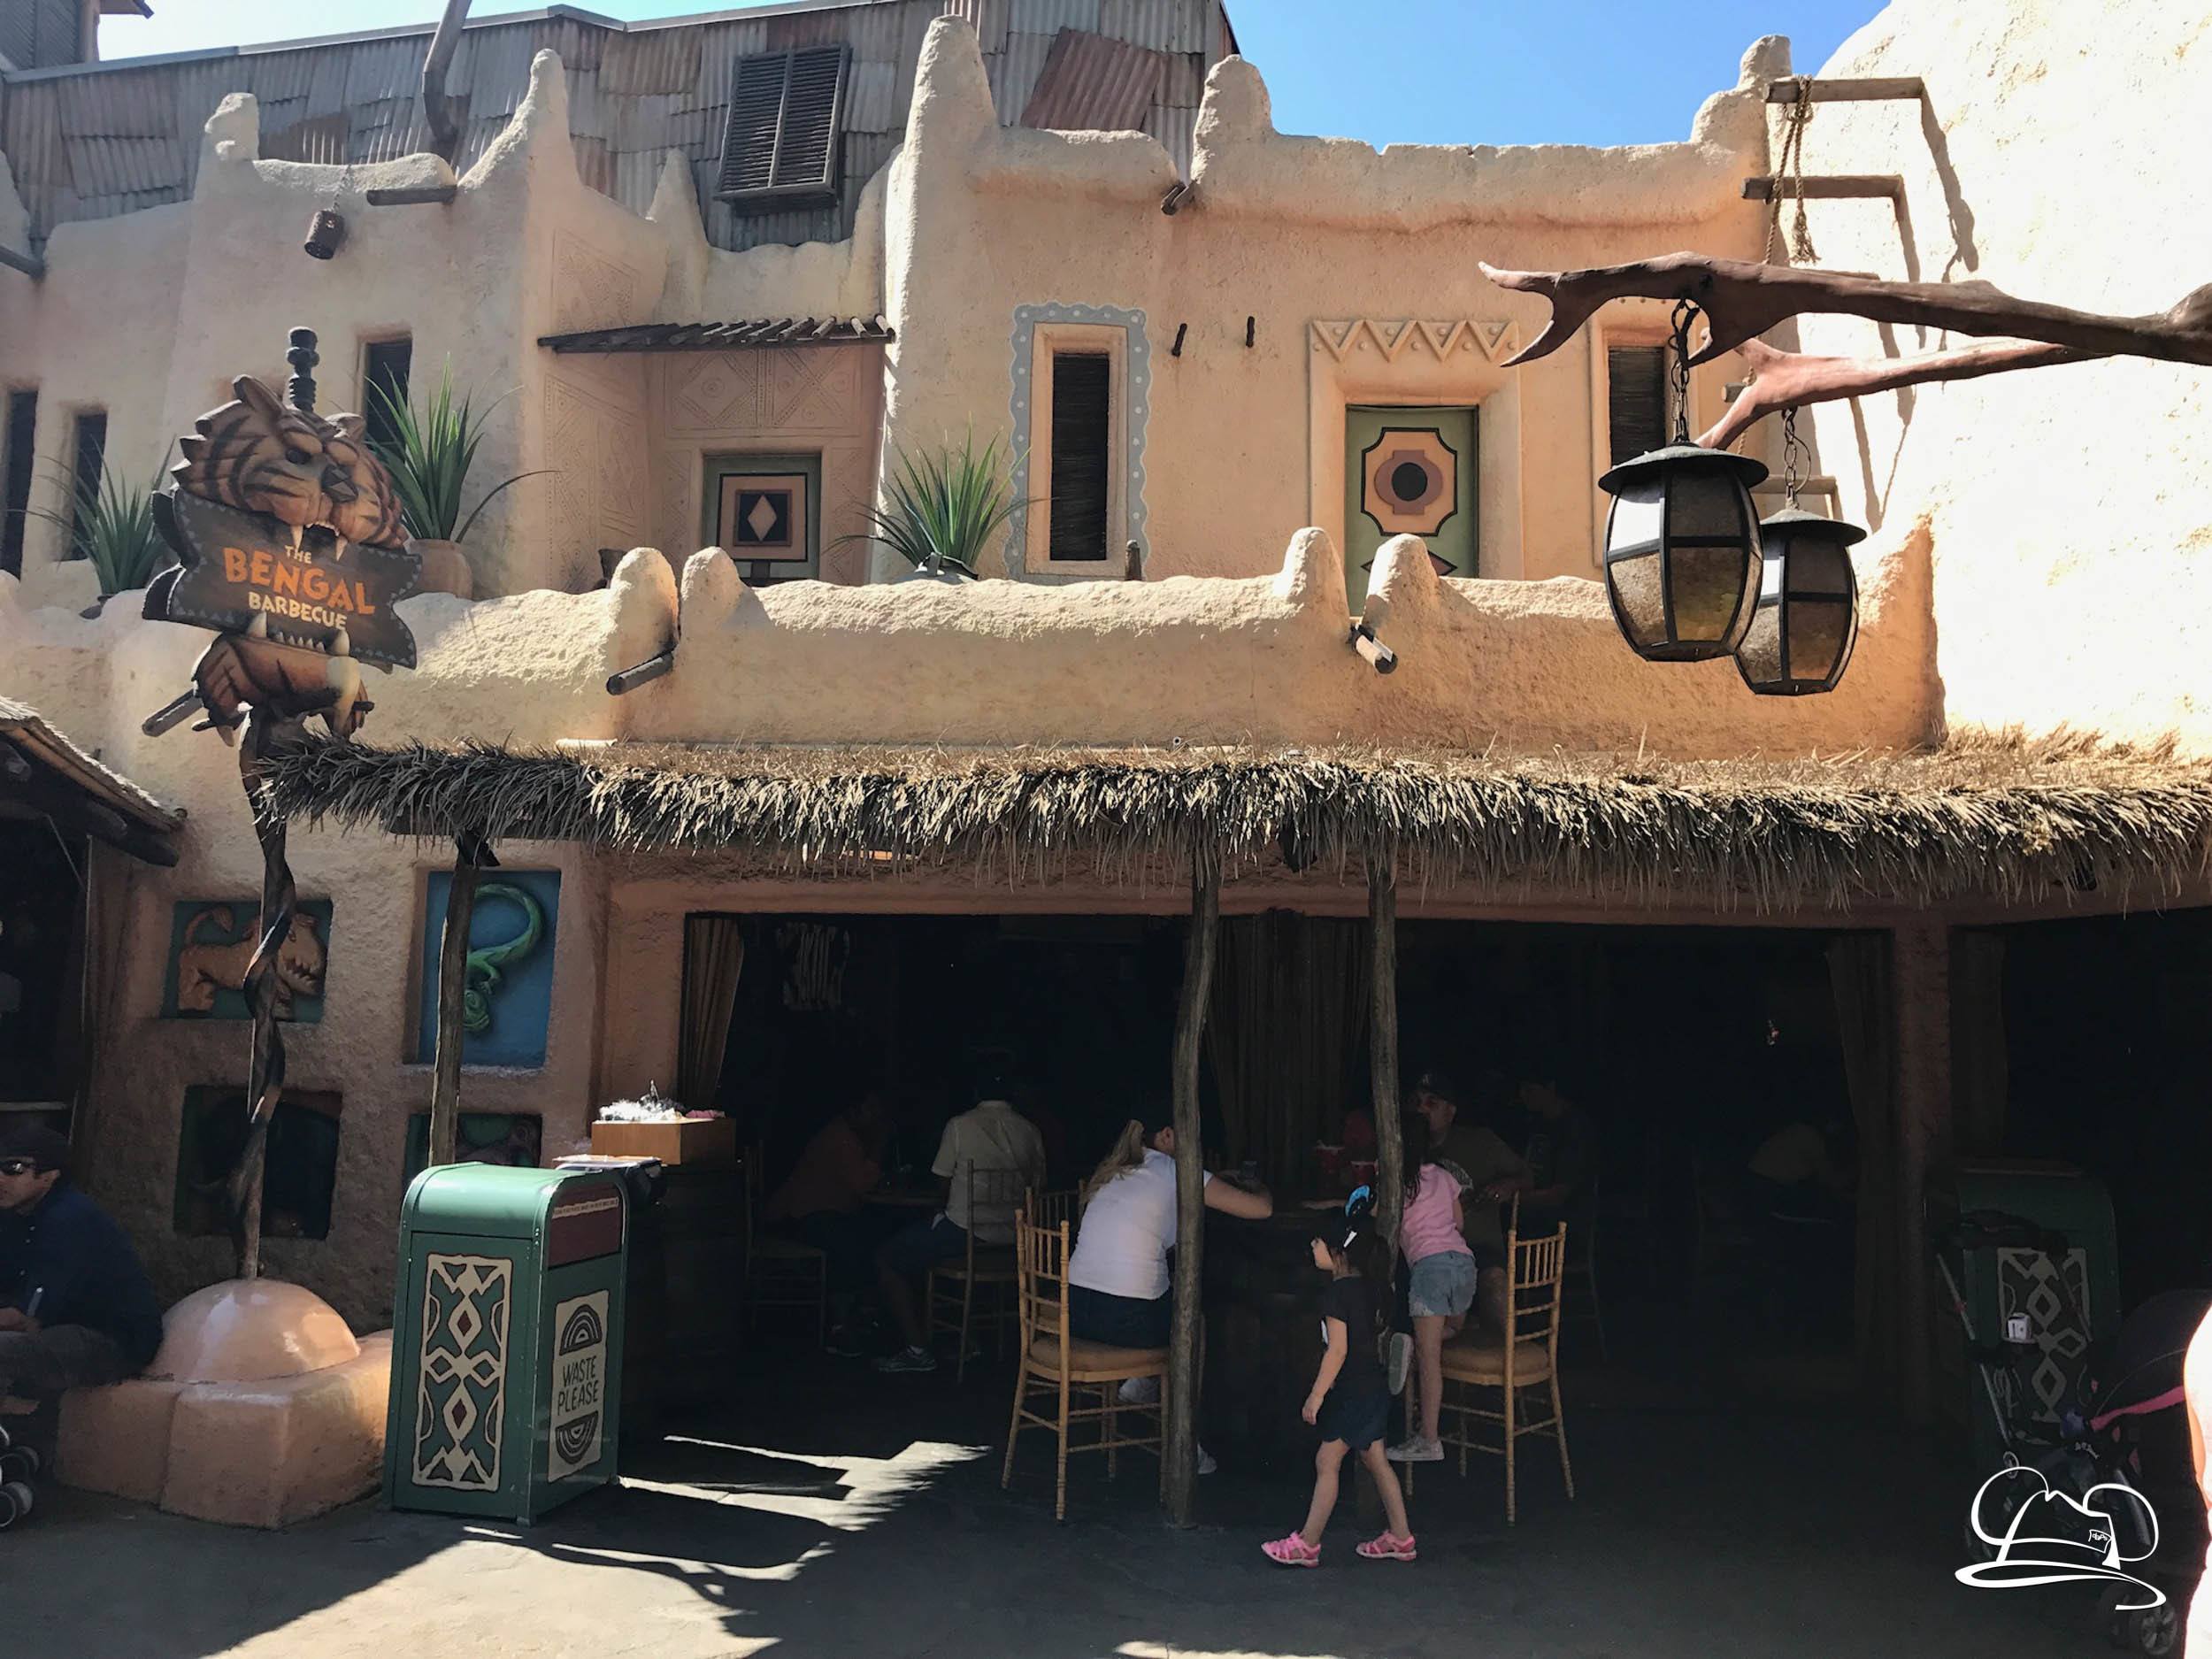 New Bengal Barbecue Seating and Stroller Parking Comes to Disneyland’s Adventureland!